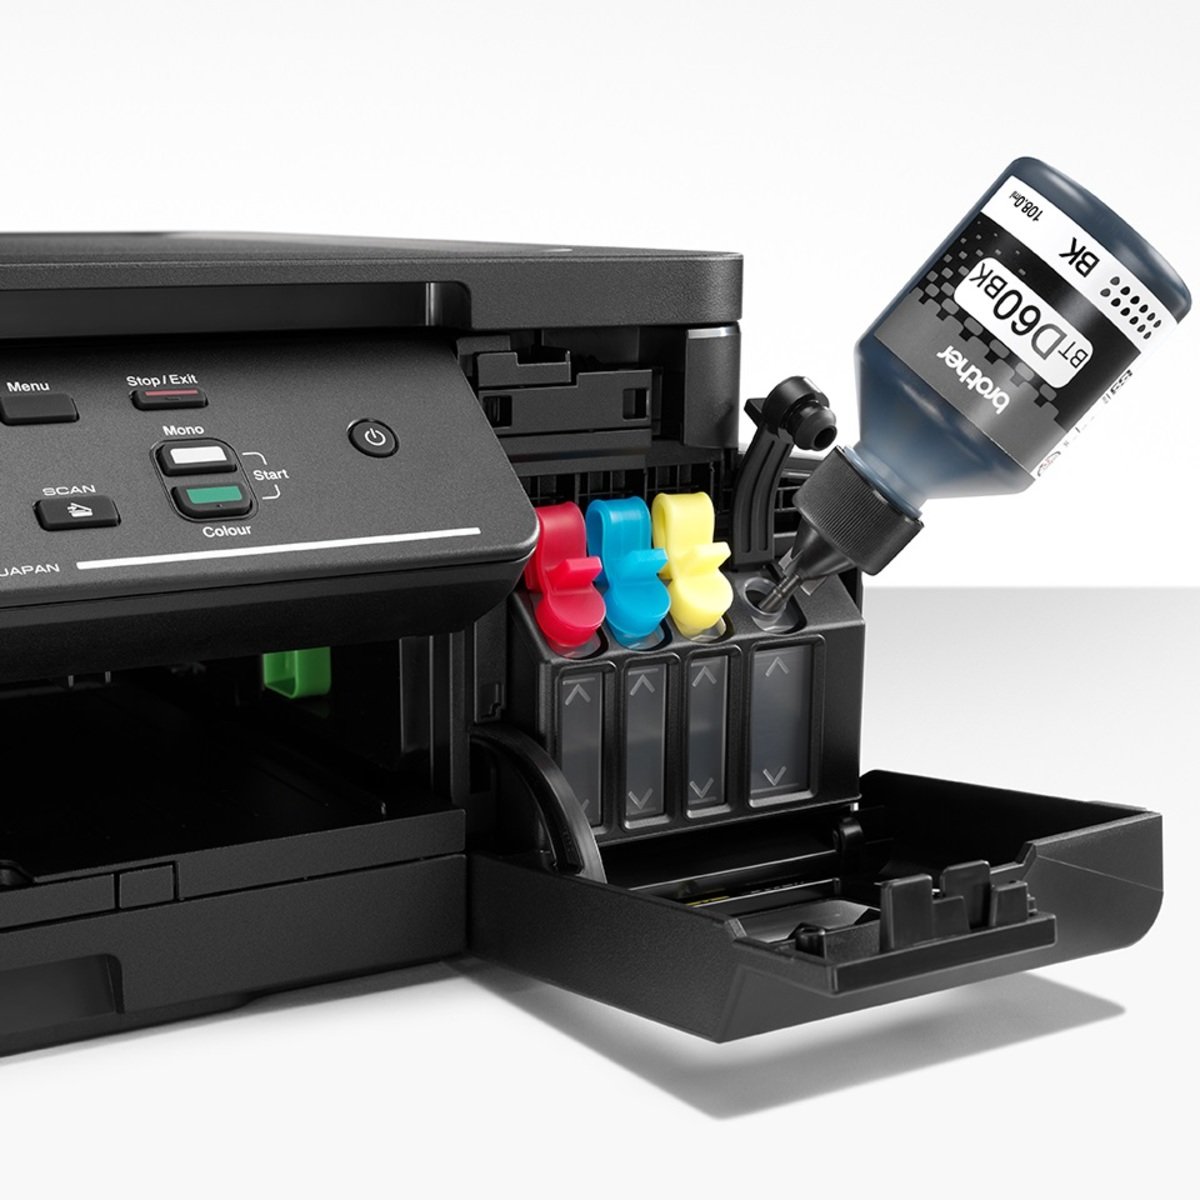 Brother Ink Tank Multi-Functional Printer DCP-T310